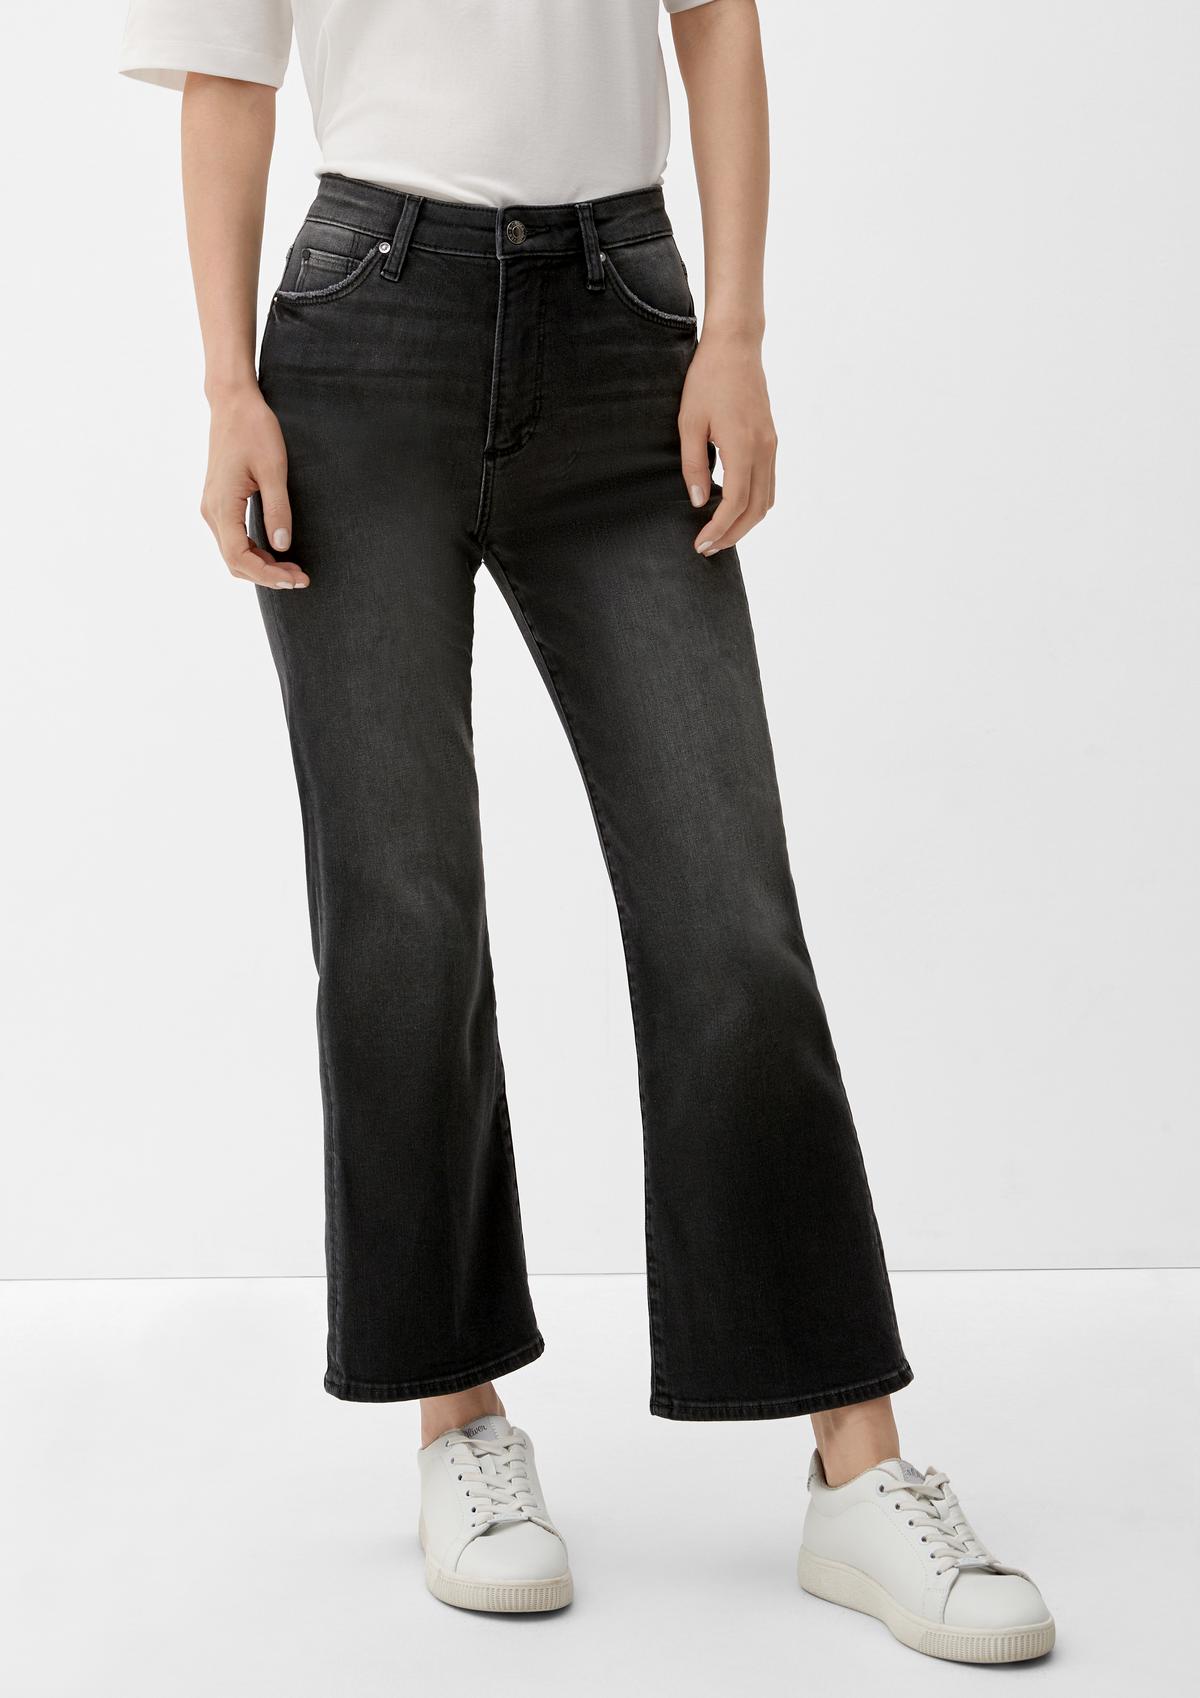 Cropped-Jeans Flared / Slim Fit / High Rise / Flared Leg - graphit | s ...